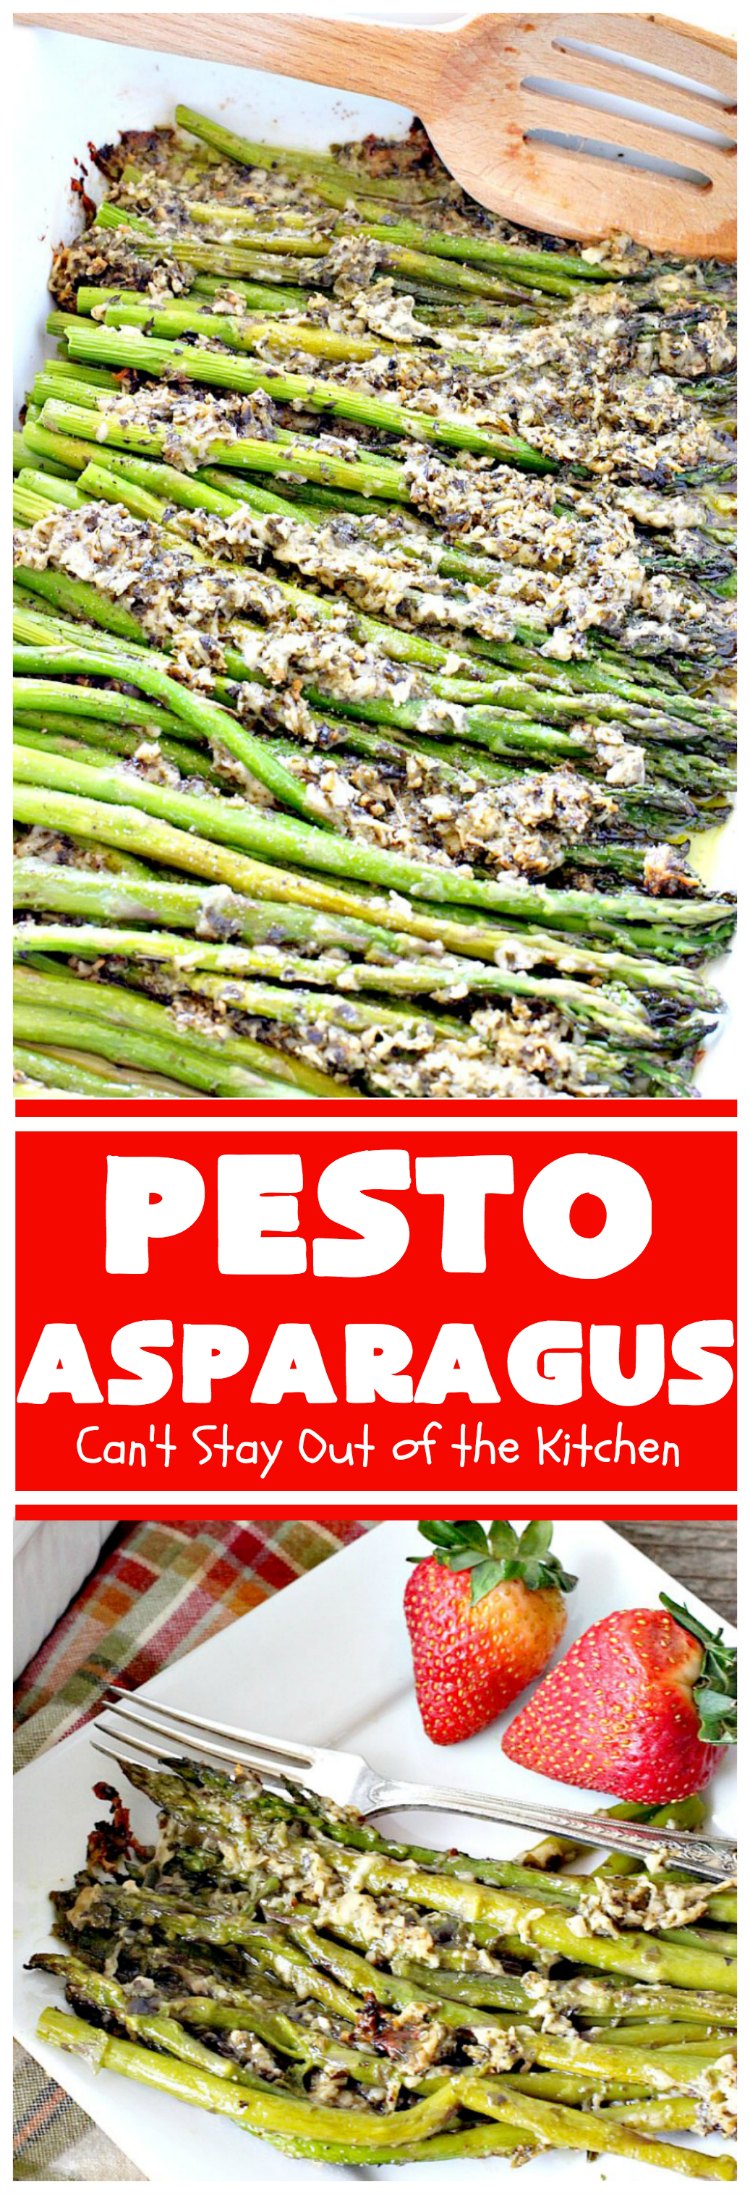 Pesto Asparagus | Can't Stay Out of the Kitchen